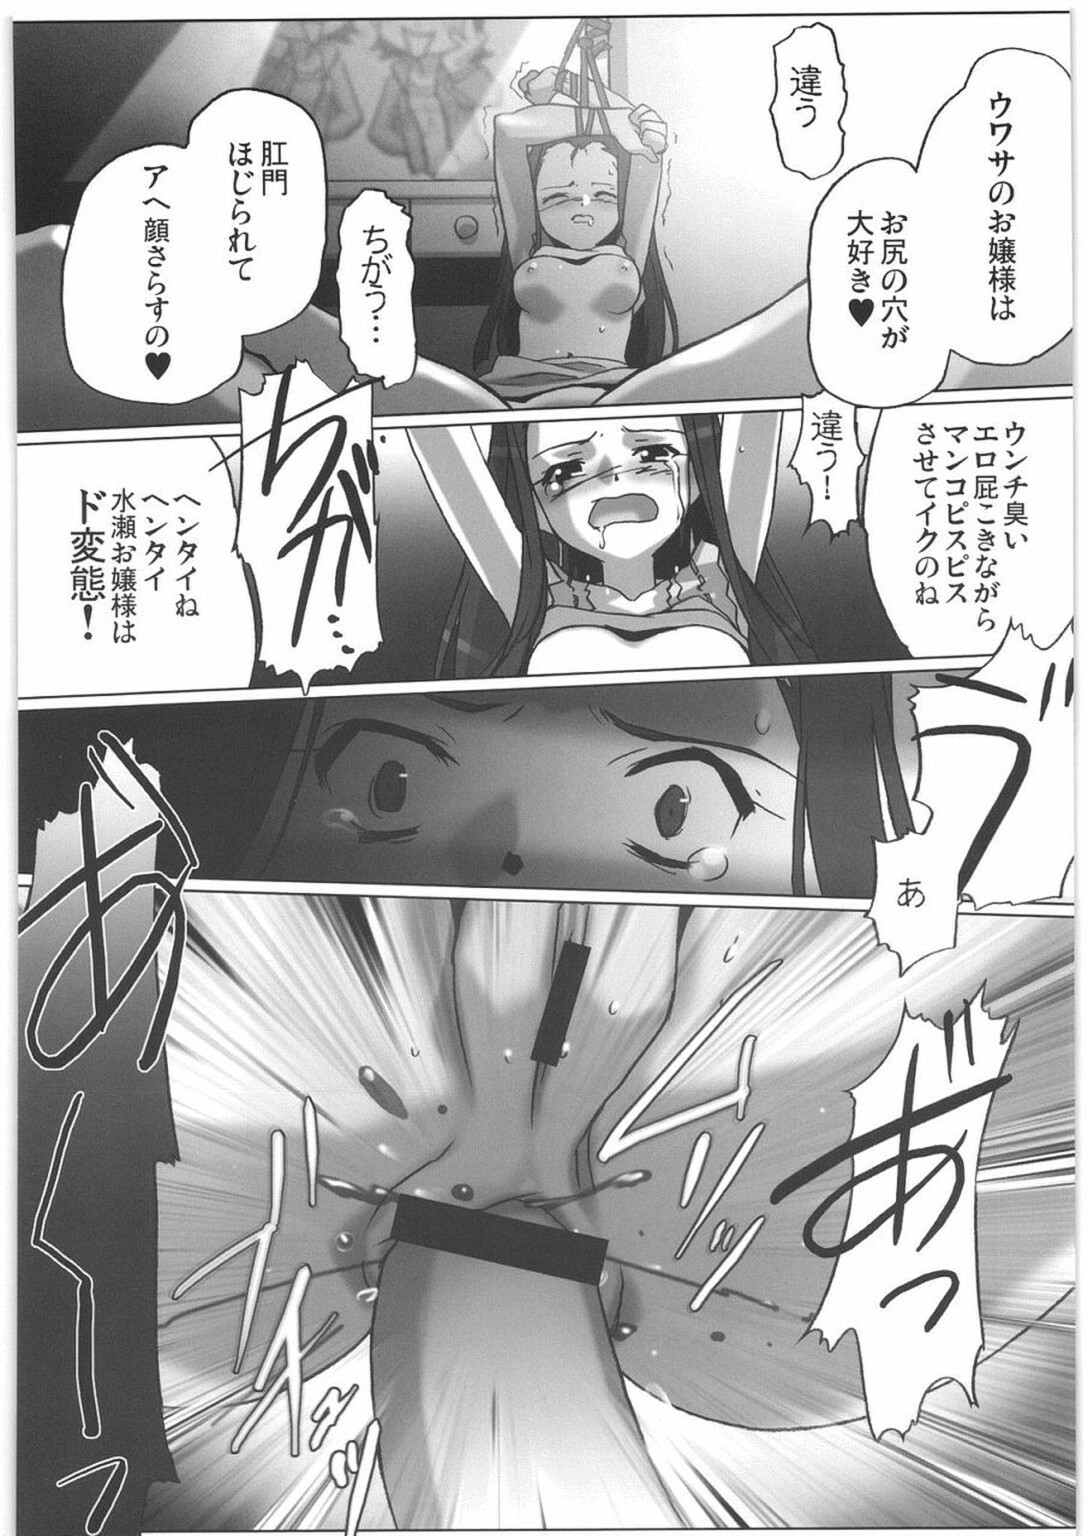 (COMIC1) [Kacchuu Musume (Various)] THE IDOLM@STER HEX STRIKE (iDOLM@STER) page 53 full